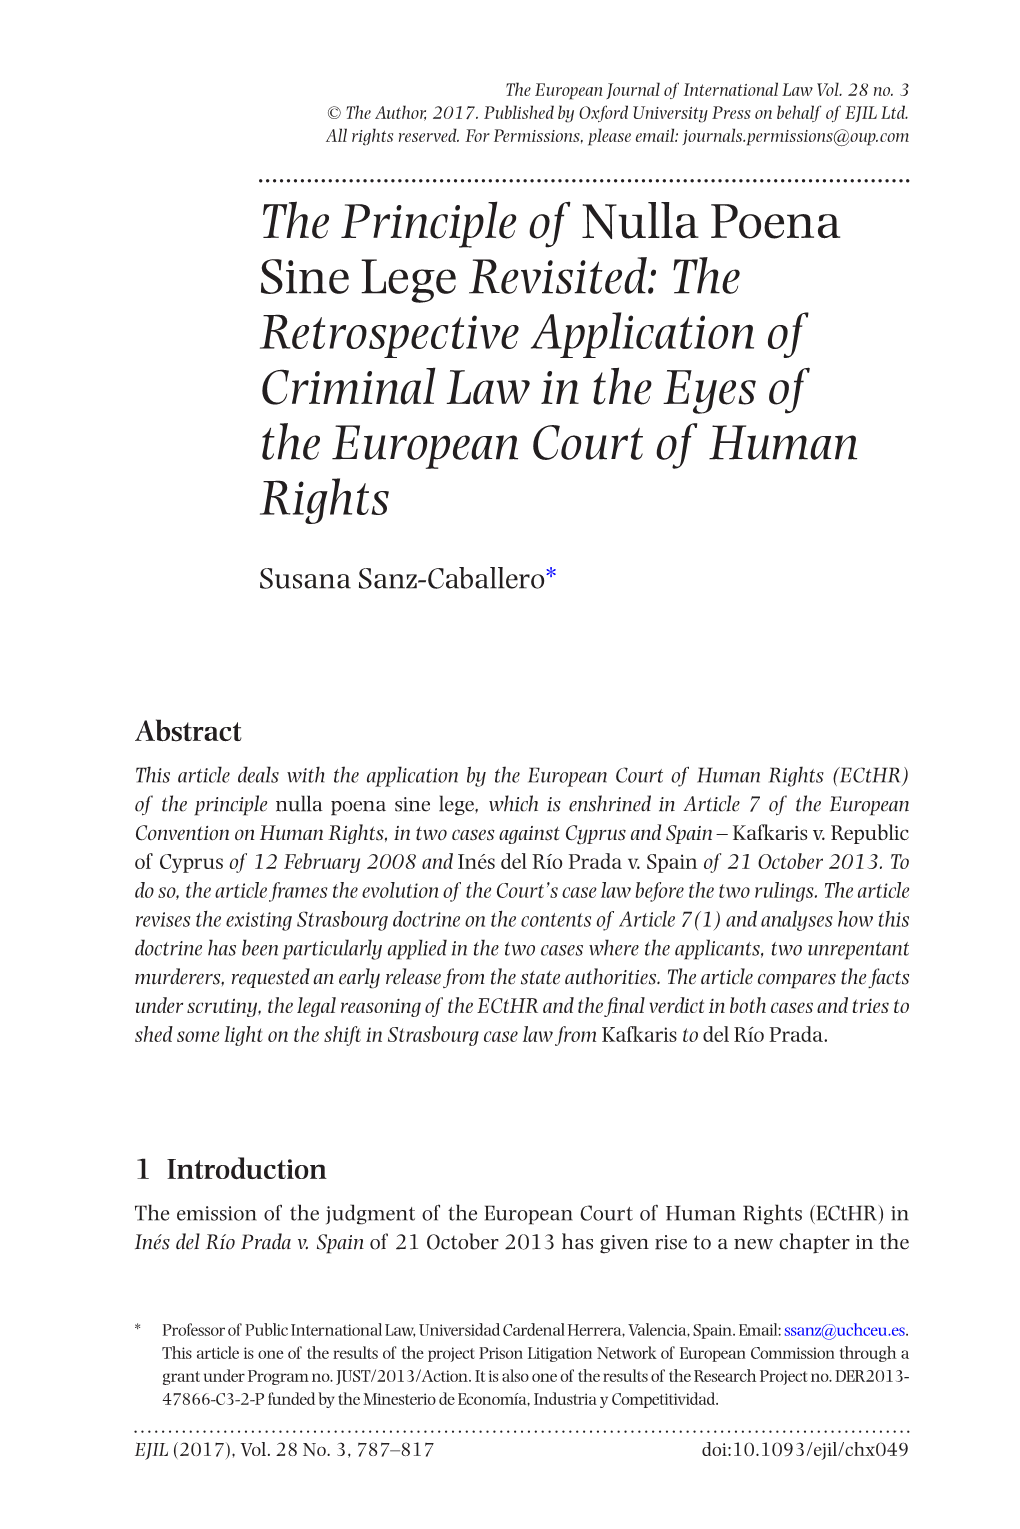 The Principle of Nulla Poena Sine Lege Revisited: the Retrospective Application of Criminal Law in the Eyes of the European Court of Human Rights